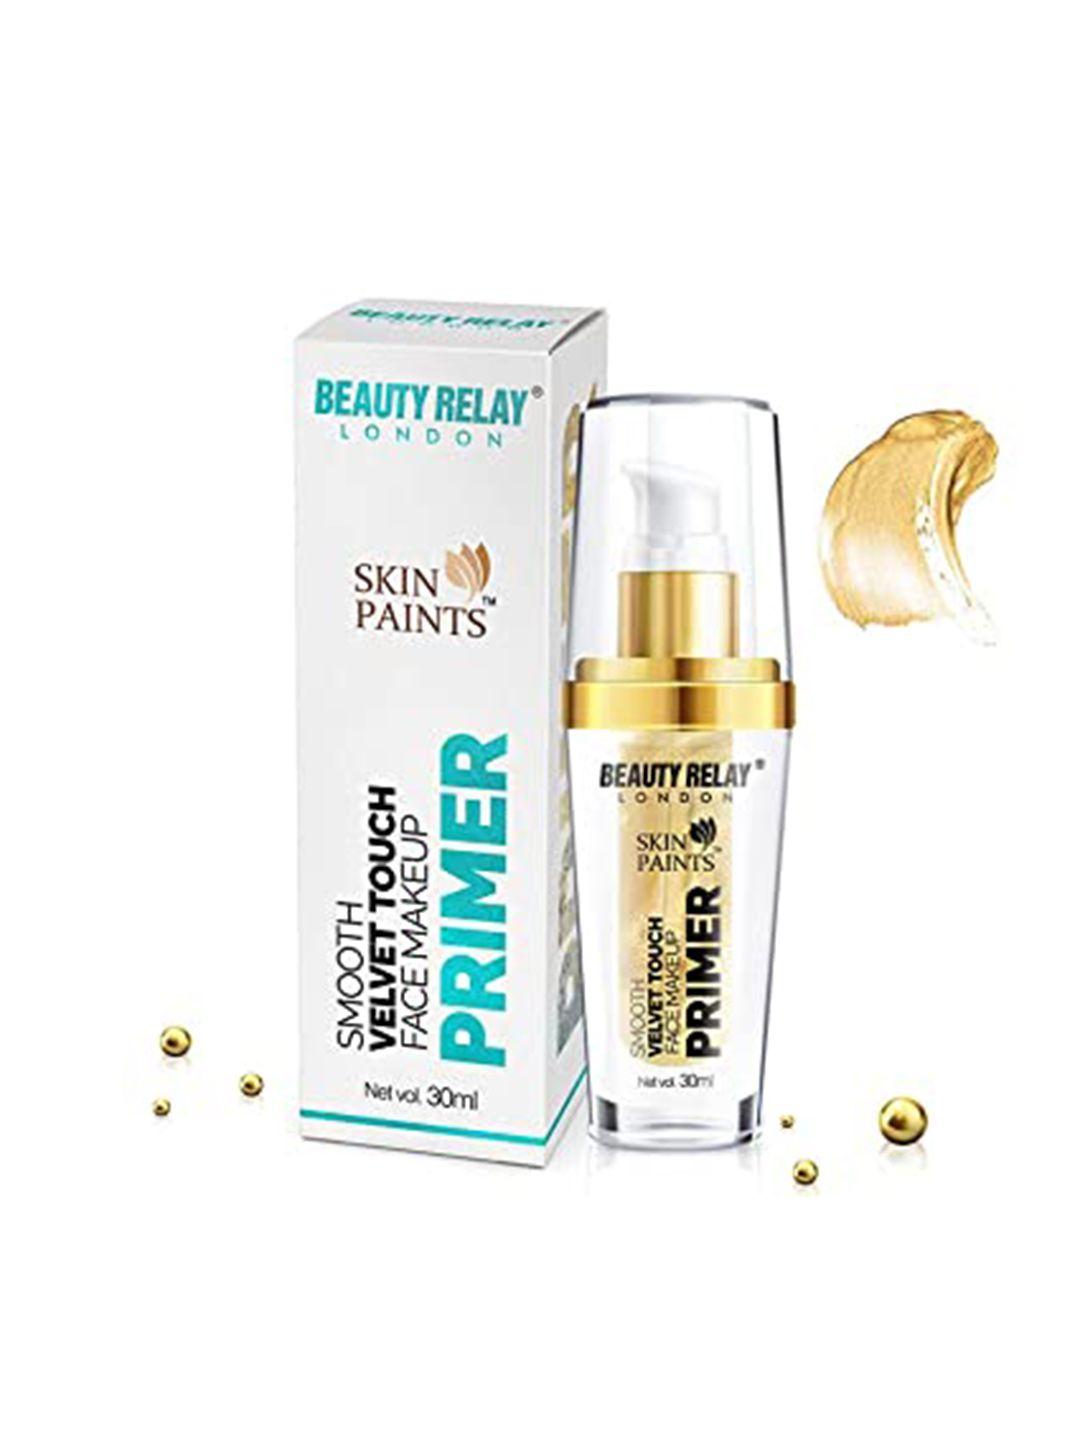 beautyrelay london skin paints smooth velvet touch face makeup primer 30ml - gold radience